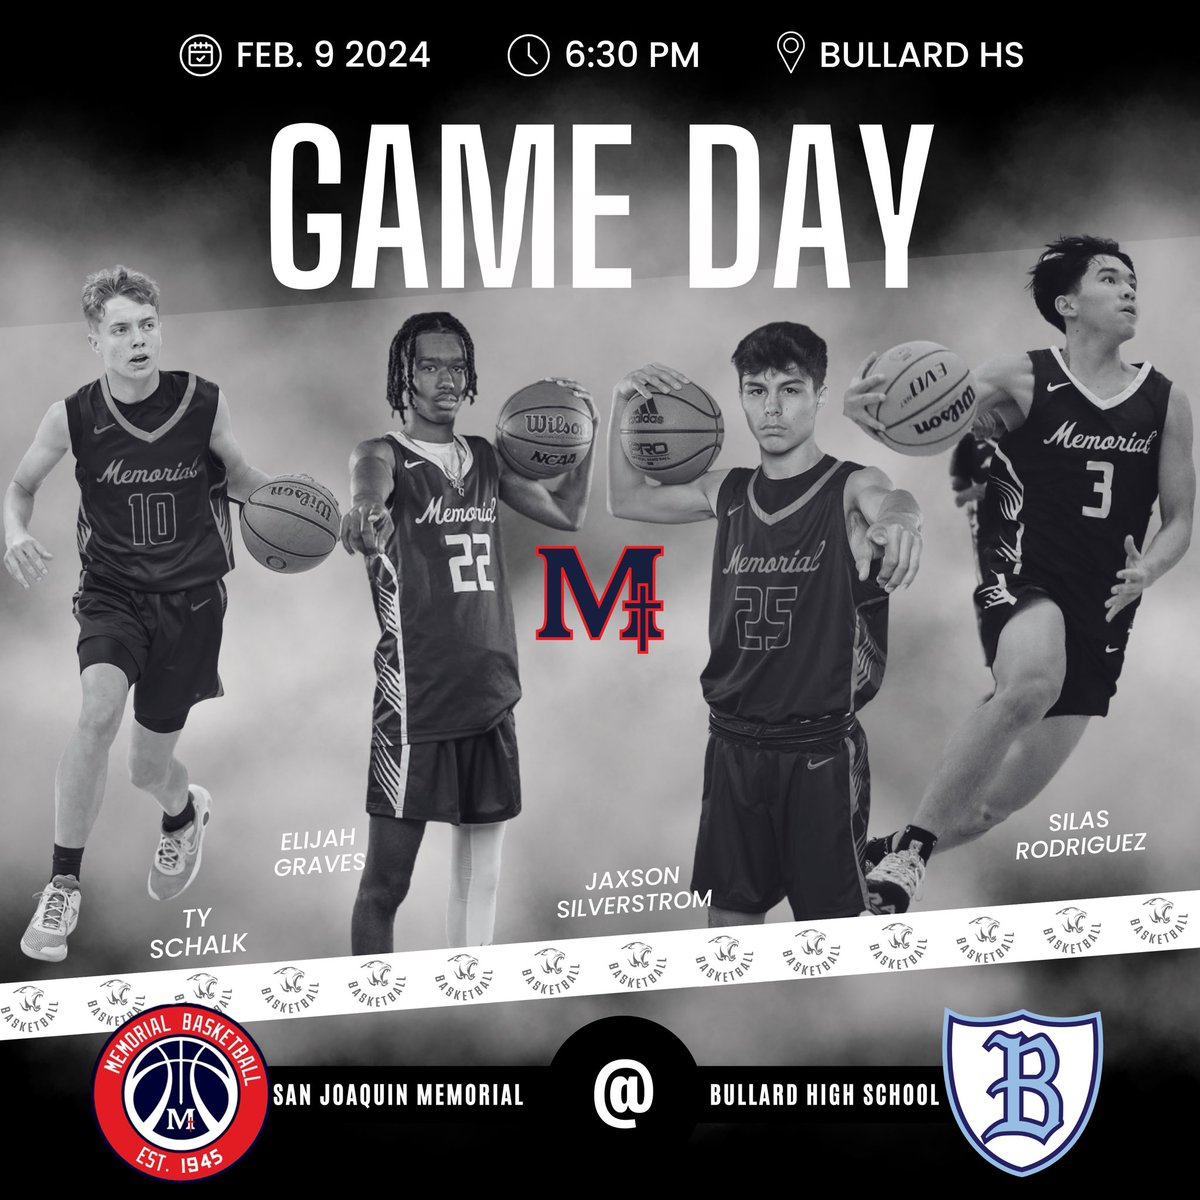 ⚠️ ‼️🚨 IT’S GAME DAY 🚨‼️⚠️ The Panthers look to seek revenge and finish strong in our 10th and final game of #CMAC League Play, as we travel to Bullard HS tonight at 6:30pm to take on the Knights 🐾 🕡 VARSITY @ 6:30pm 🕔 JV @ 4:45pm 🕞 Frosh @ 3:30pm 🗓️ Friday, Feb. 9th…